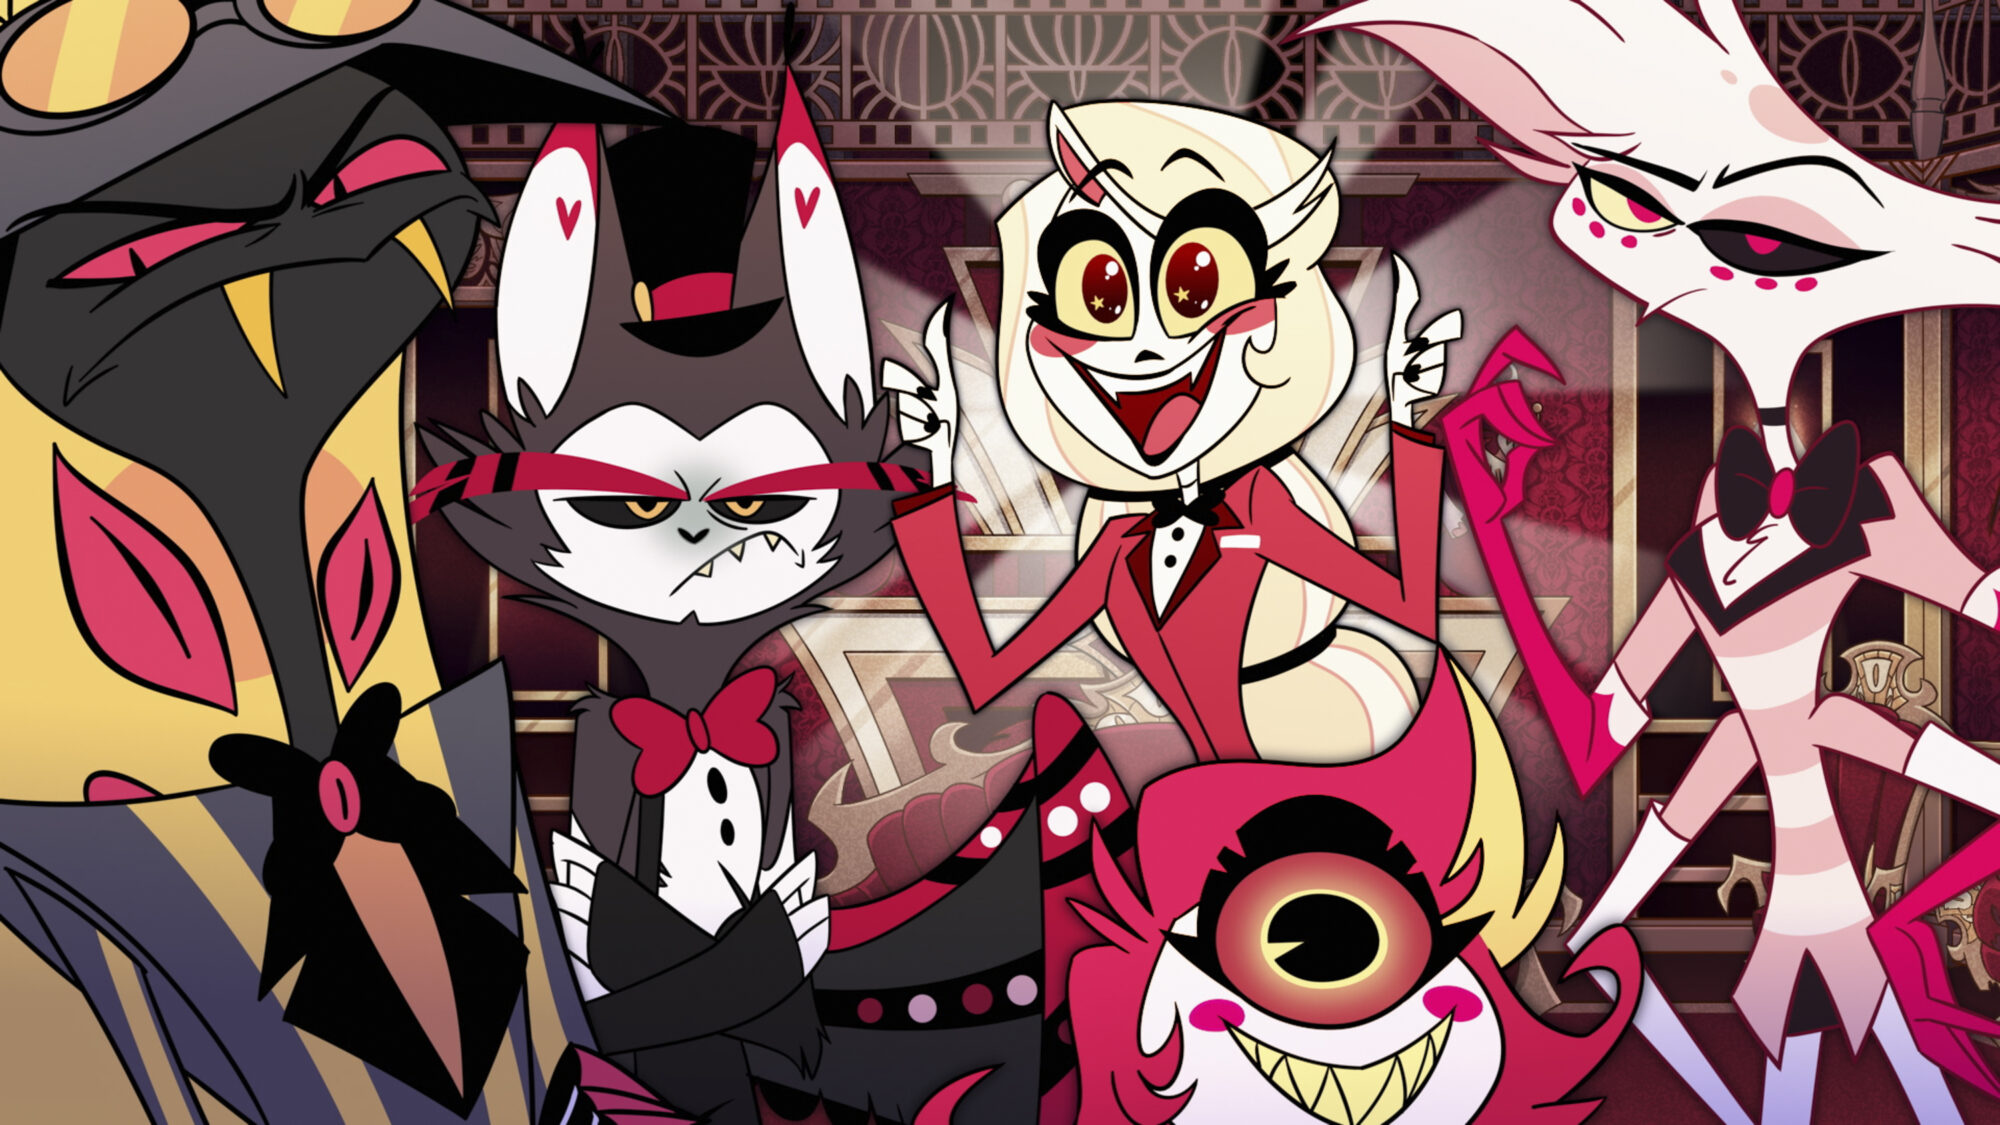 Photo of some of the characters from Hazbin Hotel, including Sir Pentious, Husk, Charlie, Niffty, and Angel Dust